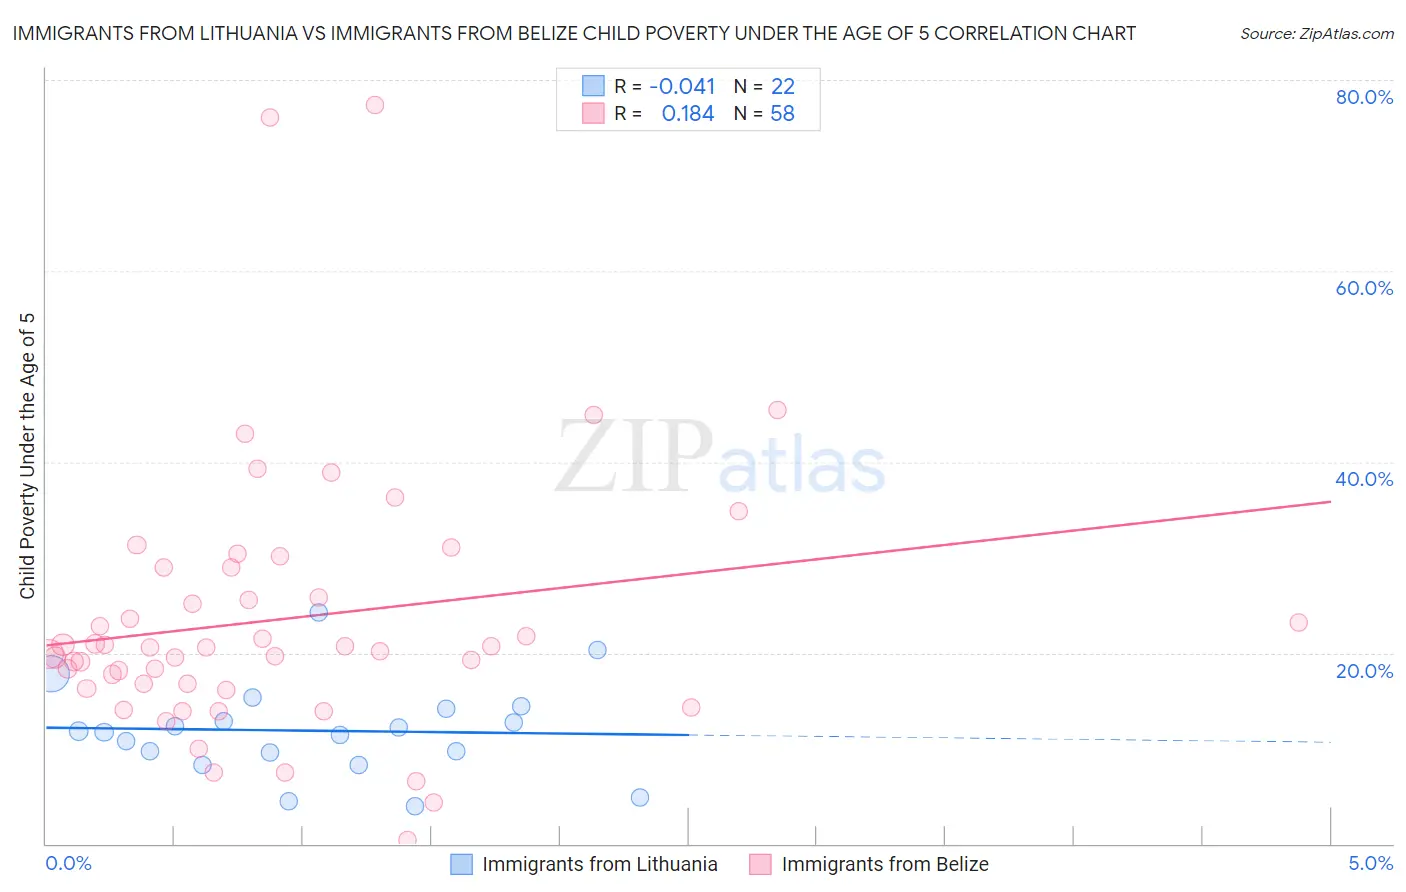 Immigrants from Lithuania vs Immigrants from Belize Child Poverty Under the Age of 5